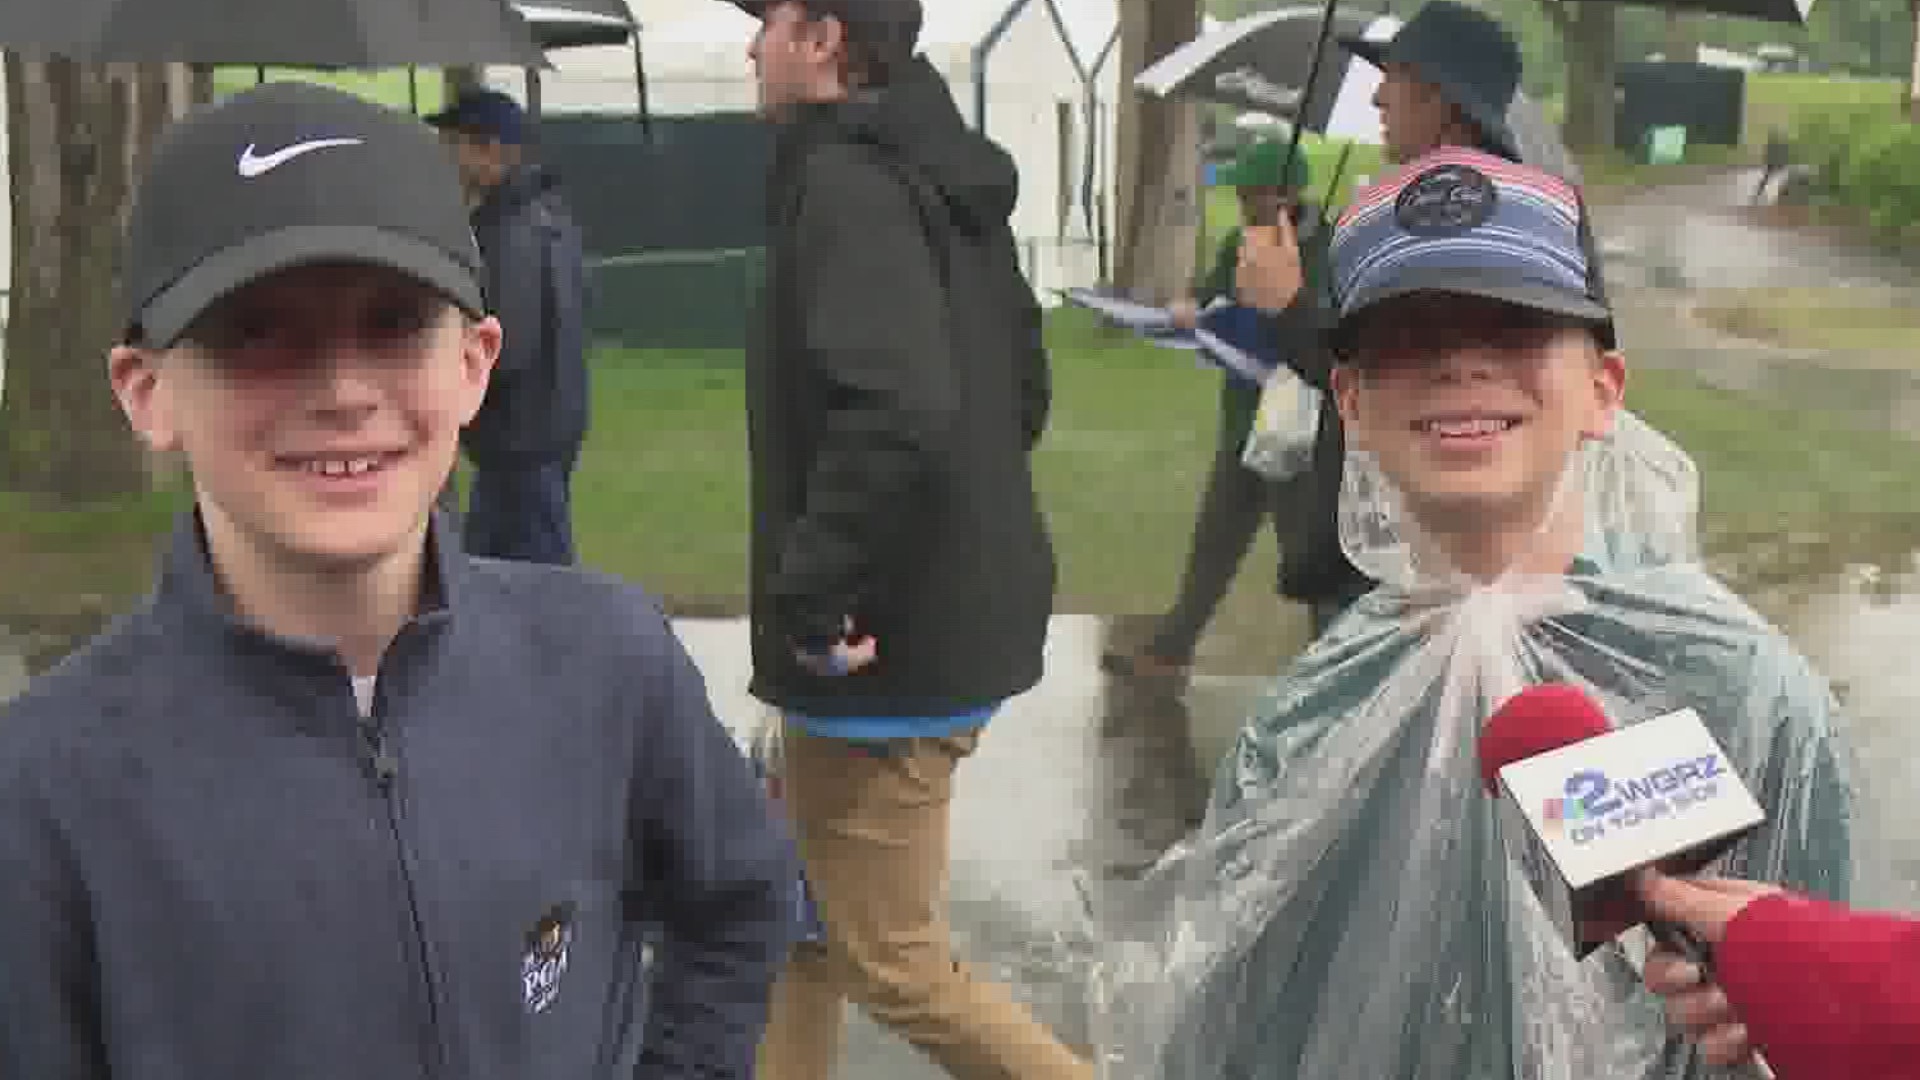 The weather was the big story for the third round of the P-G-A championships in Pittsford